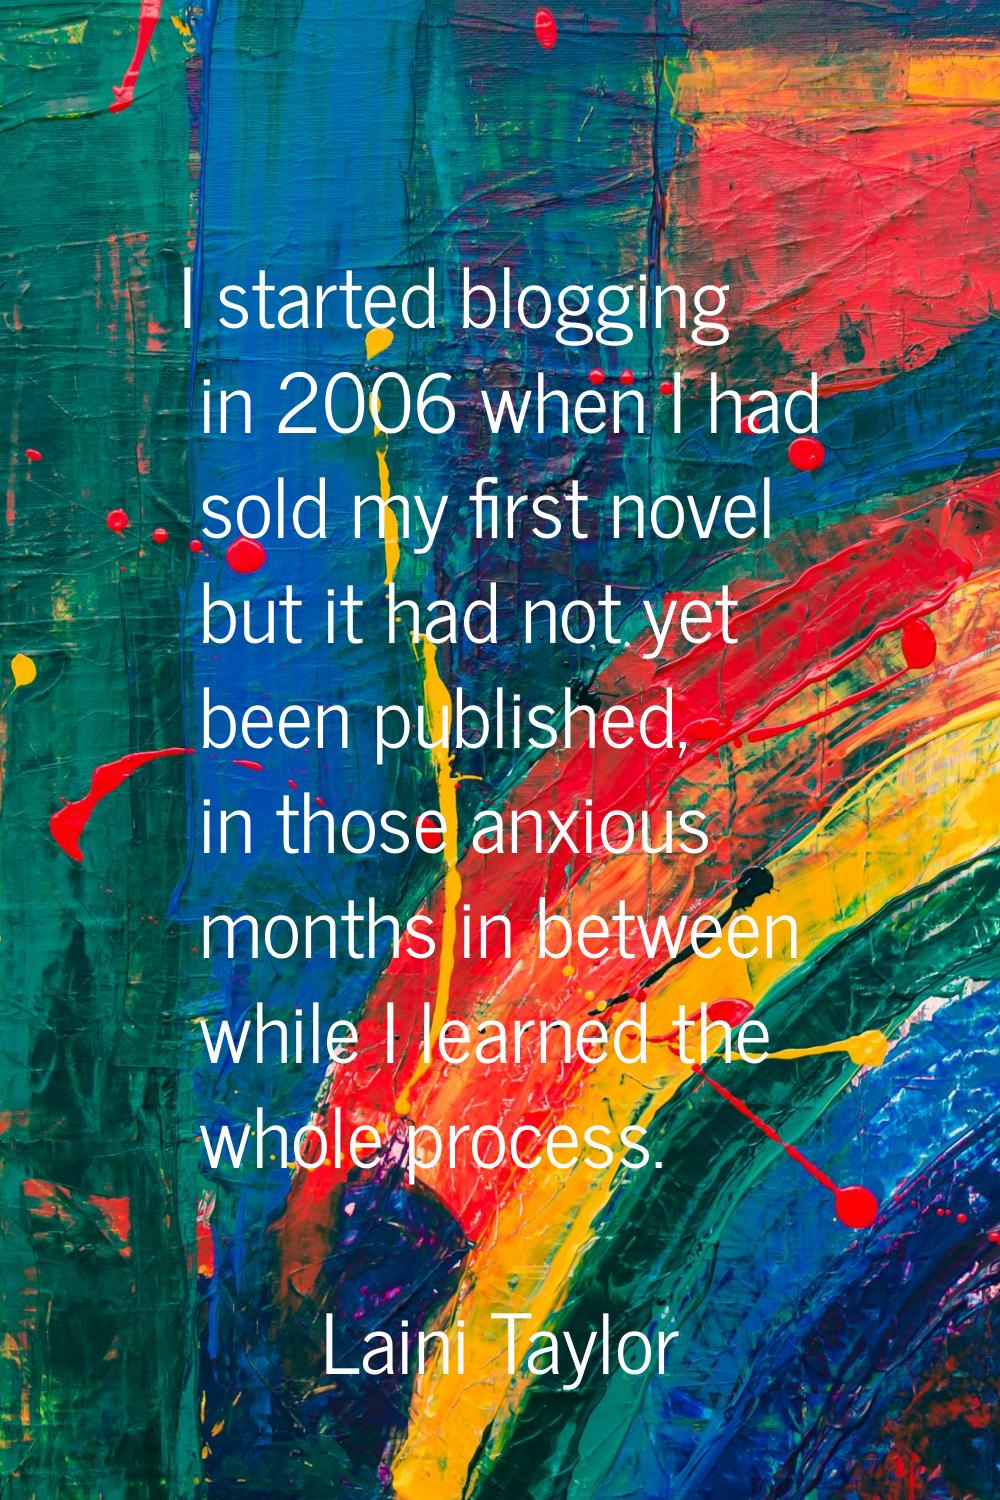 I started blogging in 2006 when I had sold my first novel but it had not yet been published, in tho